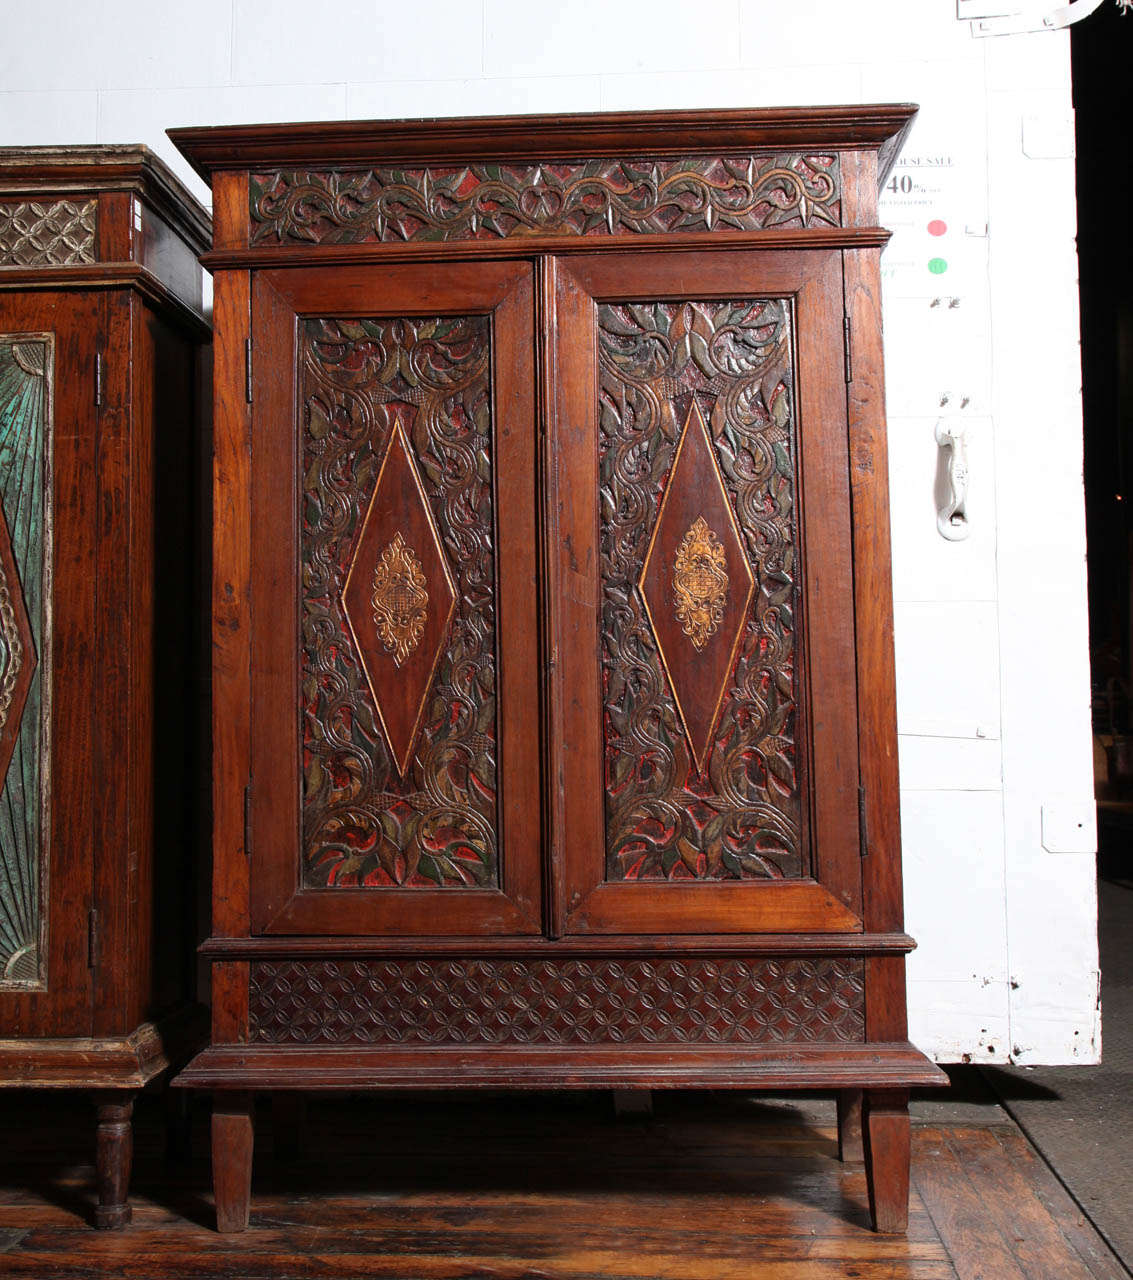 An early 20th century cabinet with detailed carved teak wood from Java, Indonesia. This cabinet adopts a rectangular shape with carved molding on its top and bottom. The two doors feature carved panels with large diamonds surrounded by foliages